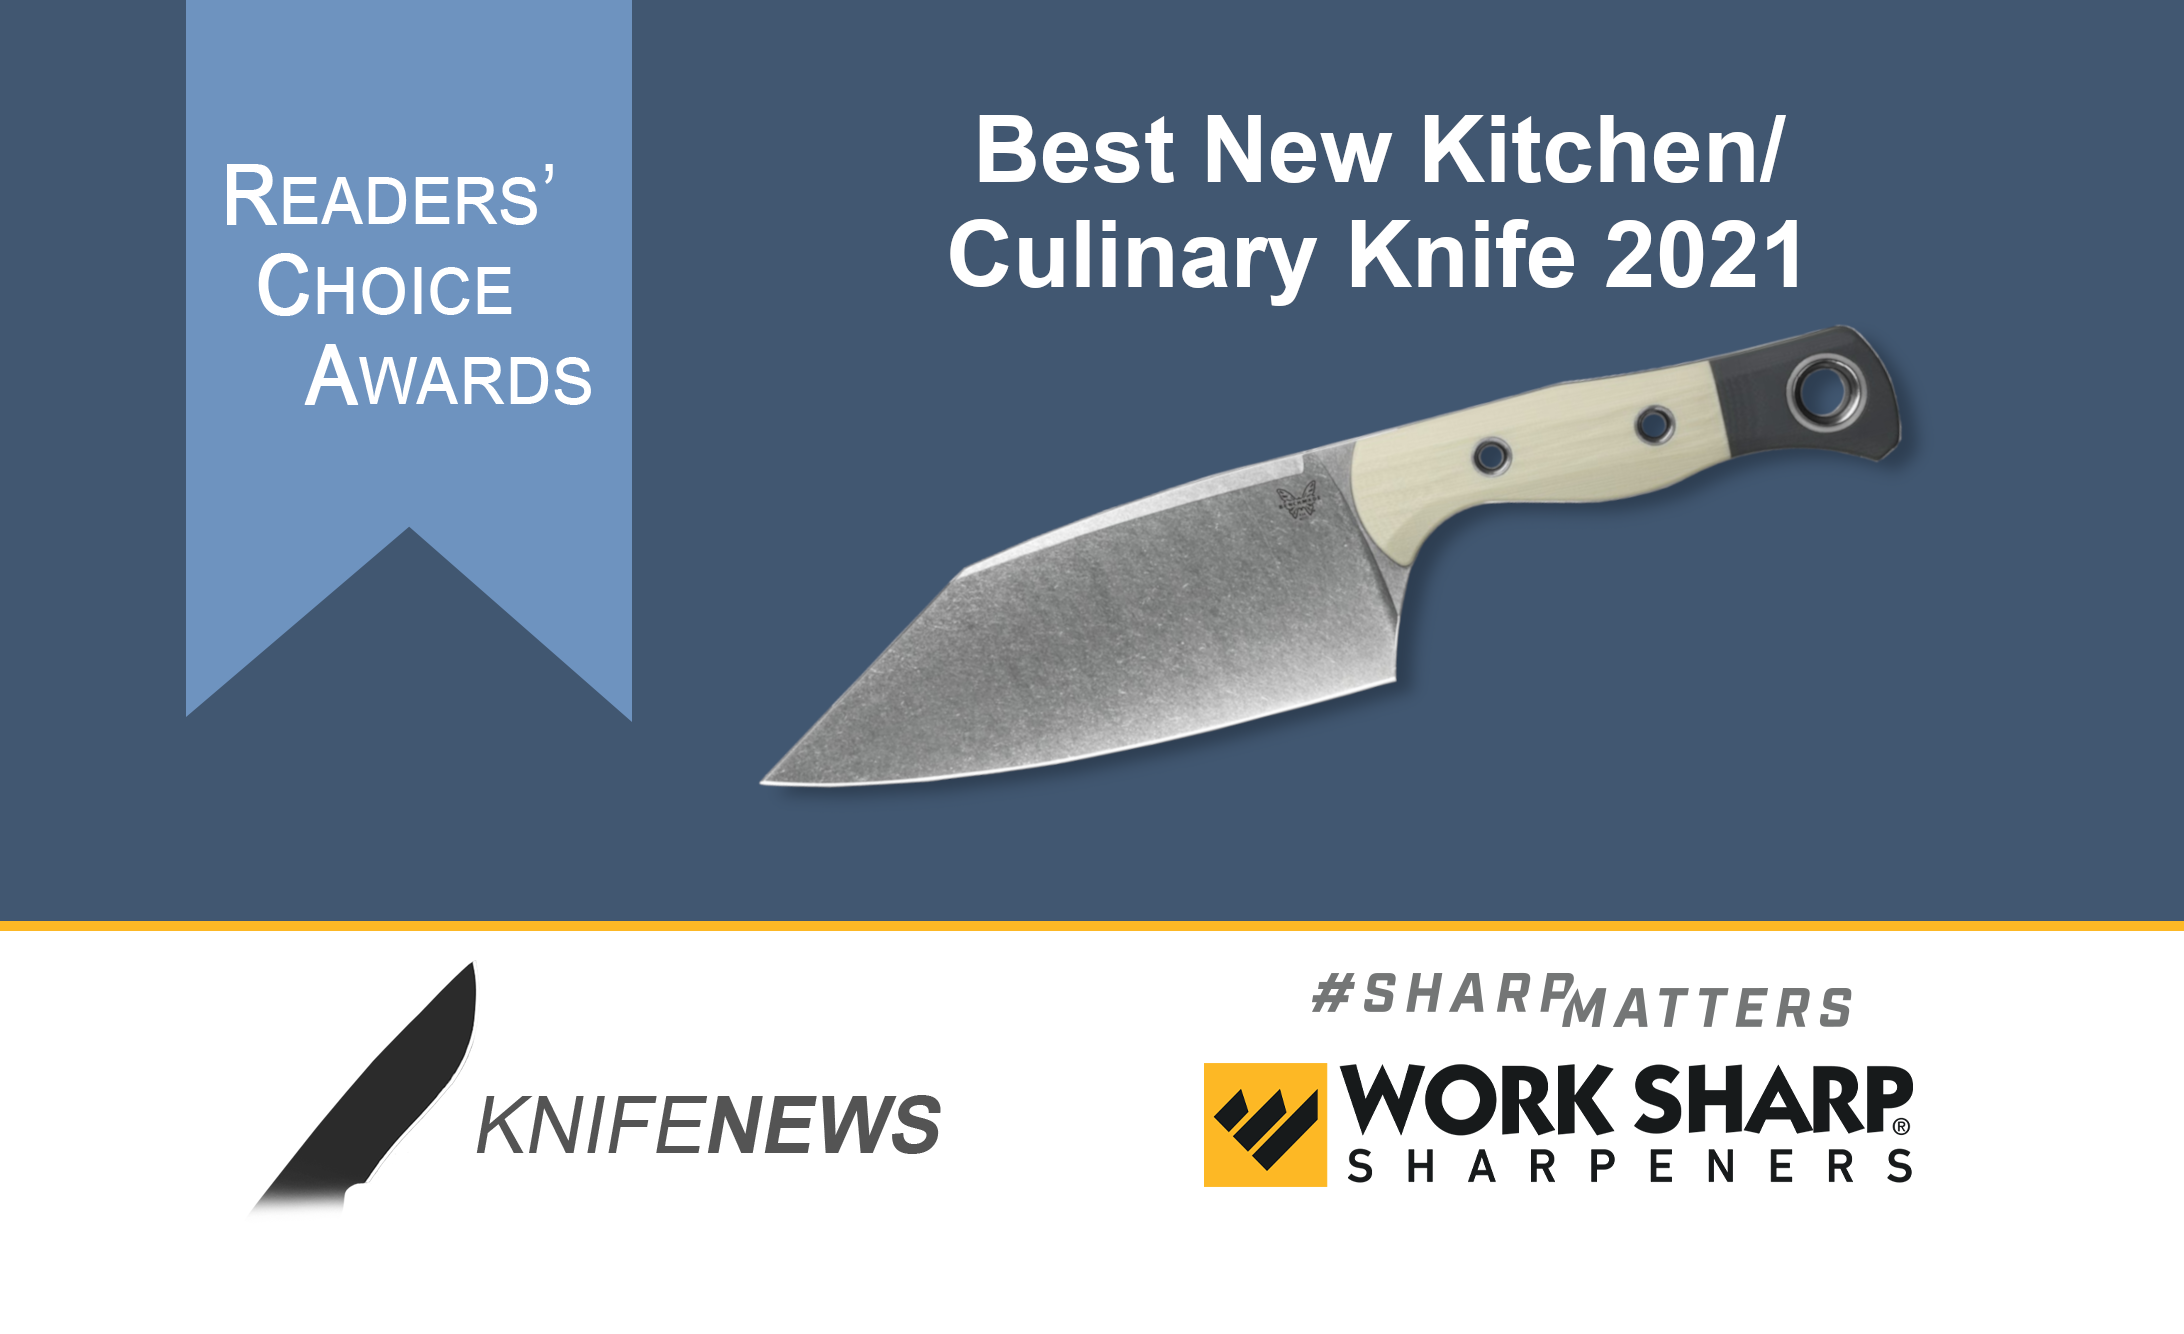 https://knifenews.com/wp-content/uploads/2022/01/rca-2021-best-kitchen-culinary-knife-benchmade-station-knife.png